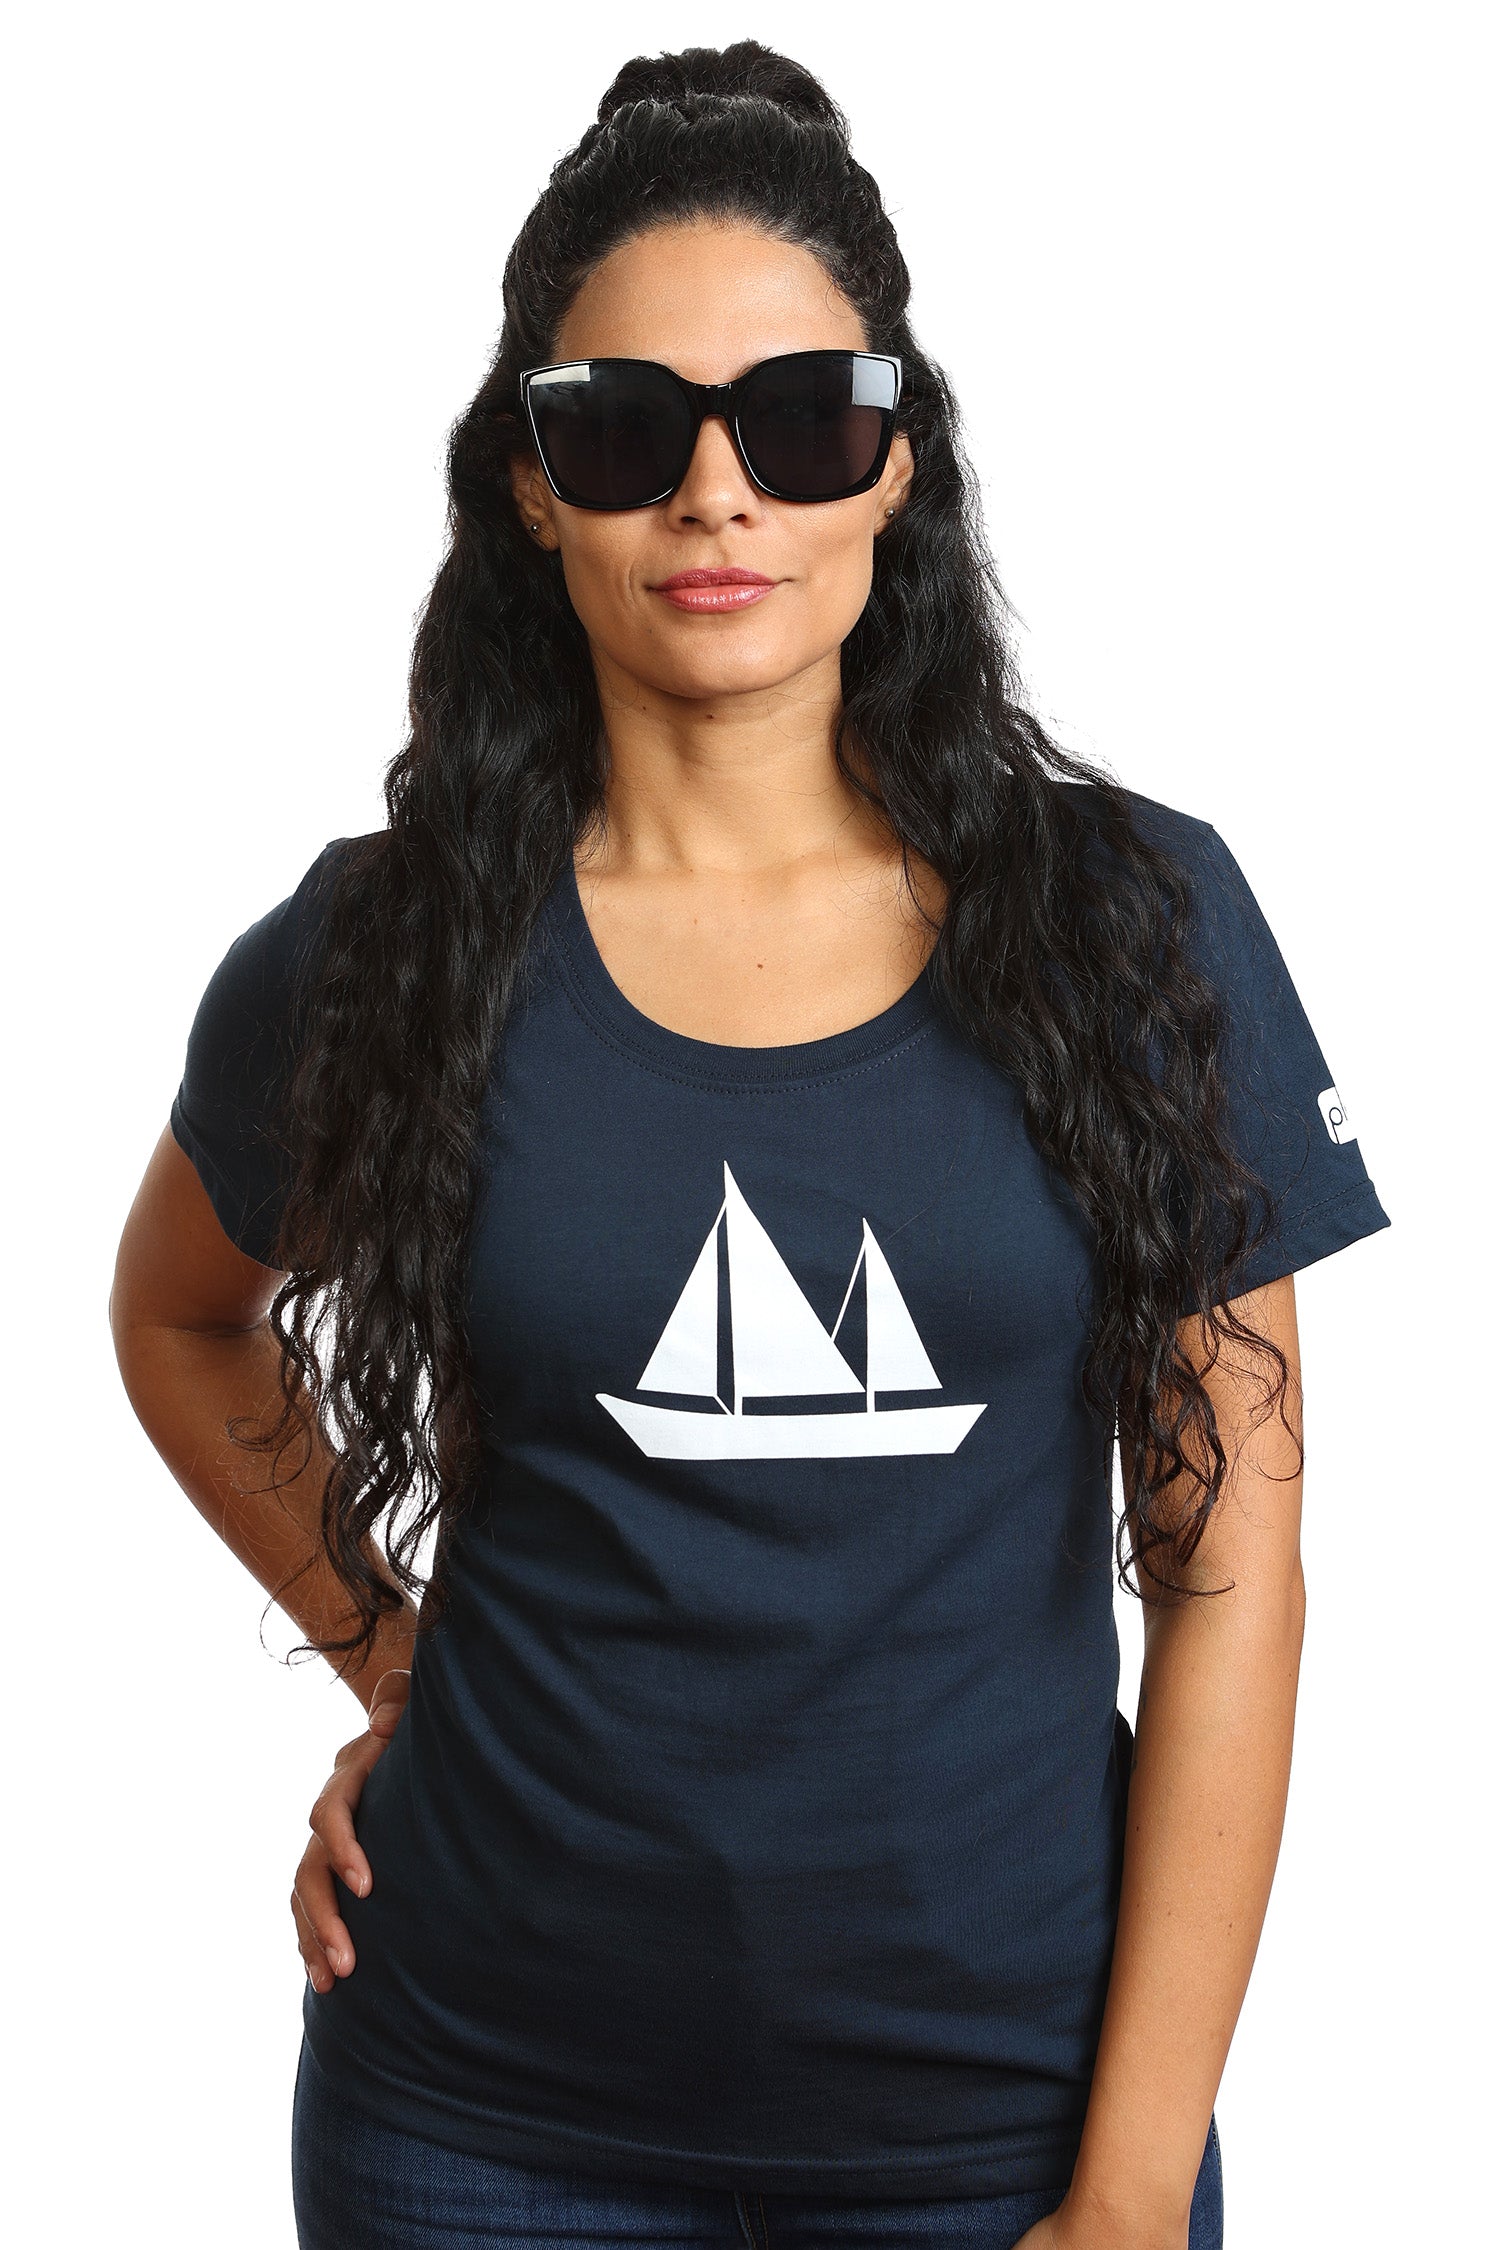 Custom Cotton Boat T-Shirts With Front Pocket